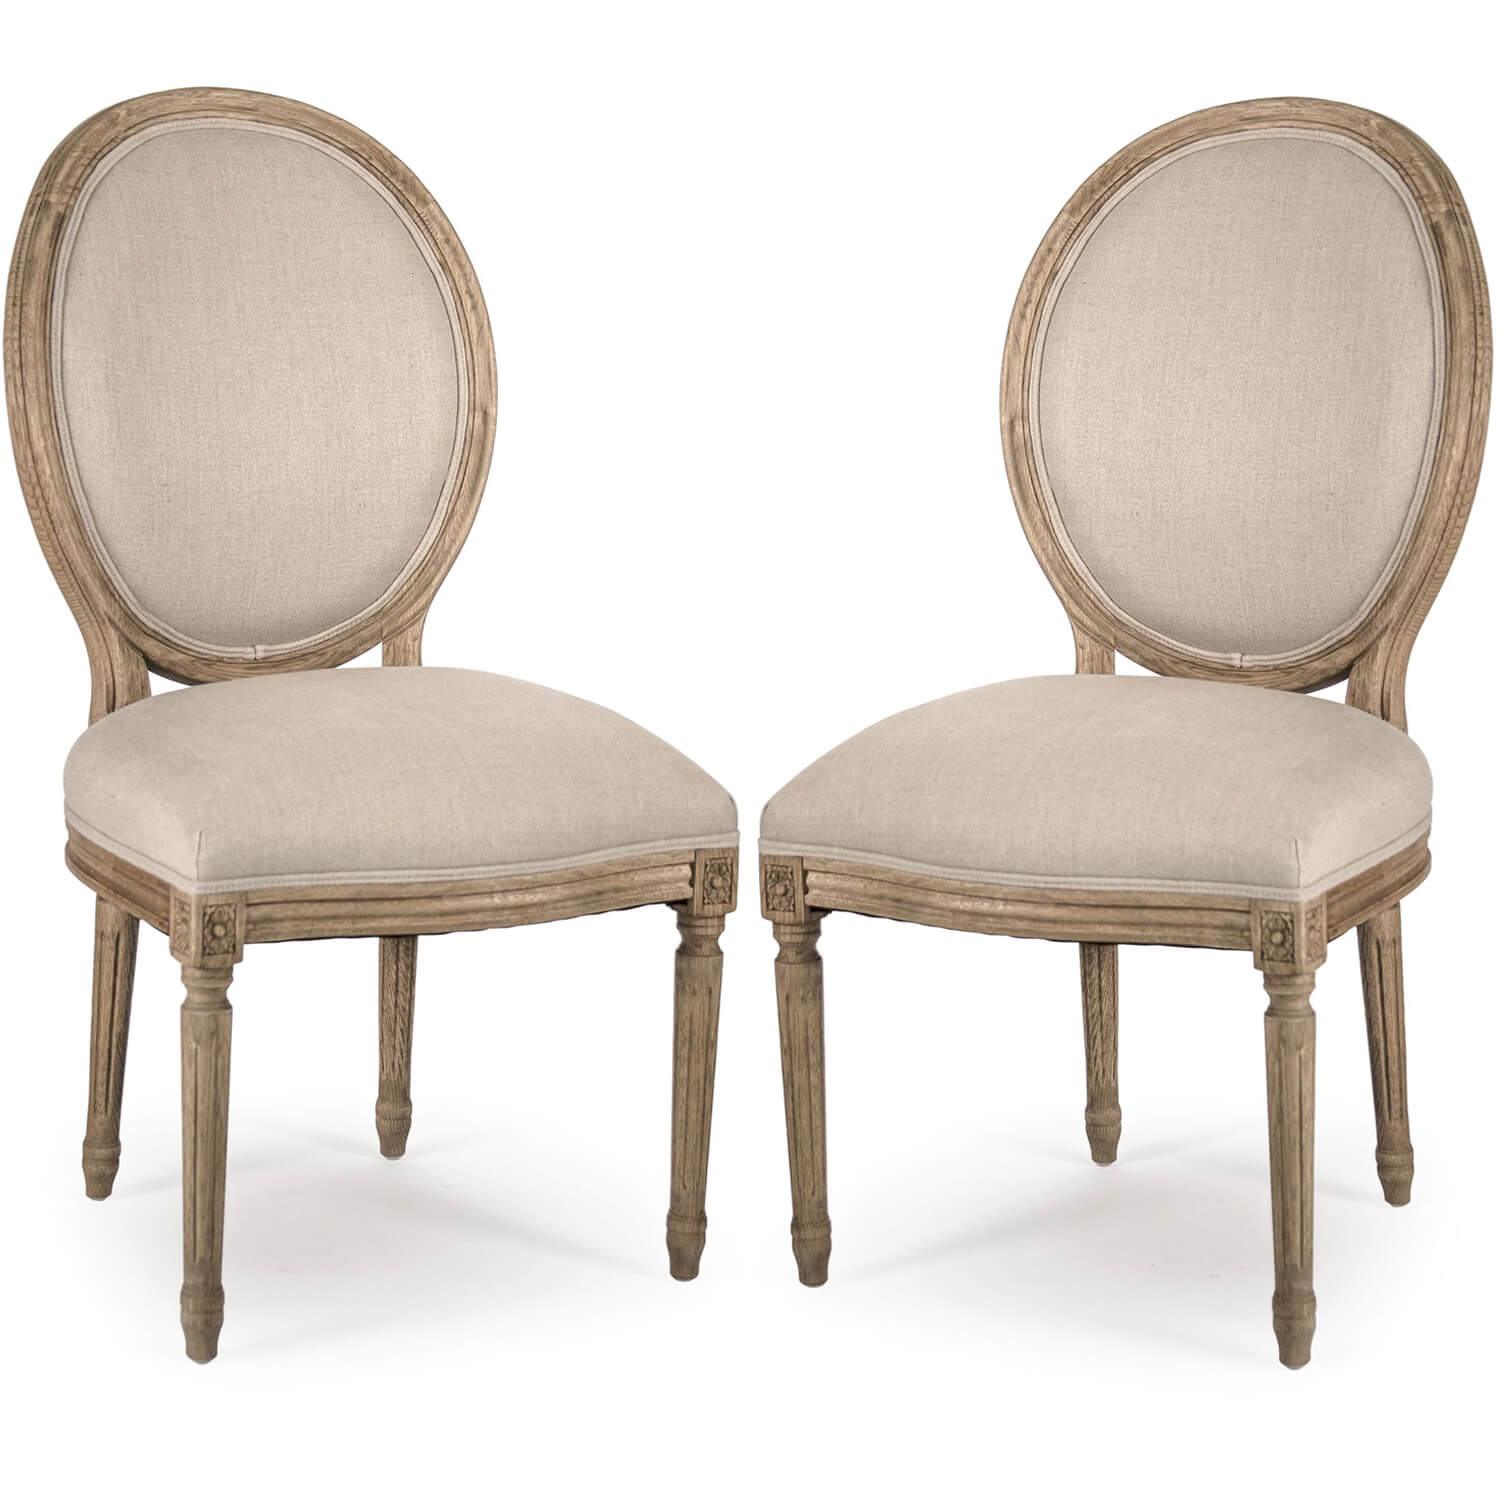 French Medallion Round Back Side Chairs - Pair - Belle Escape